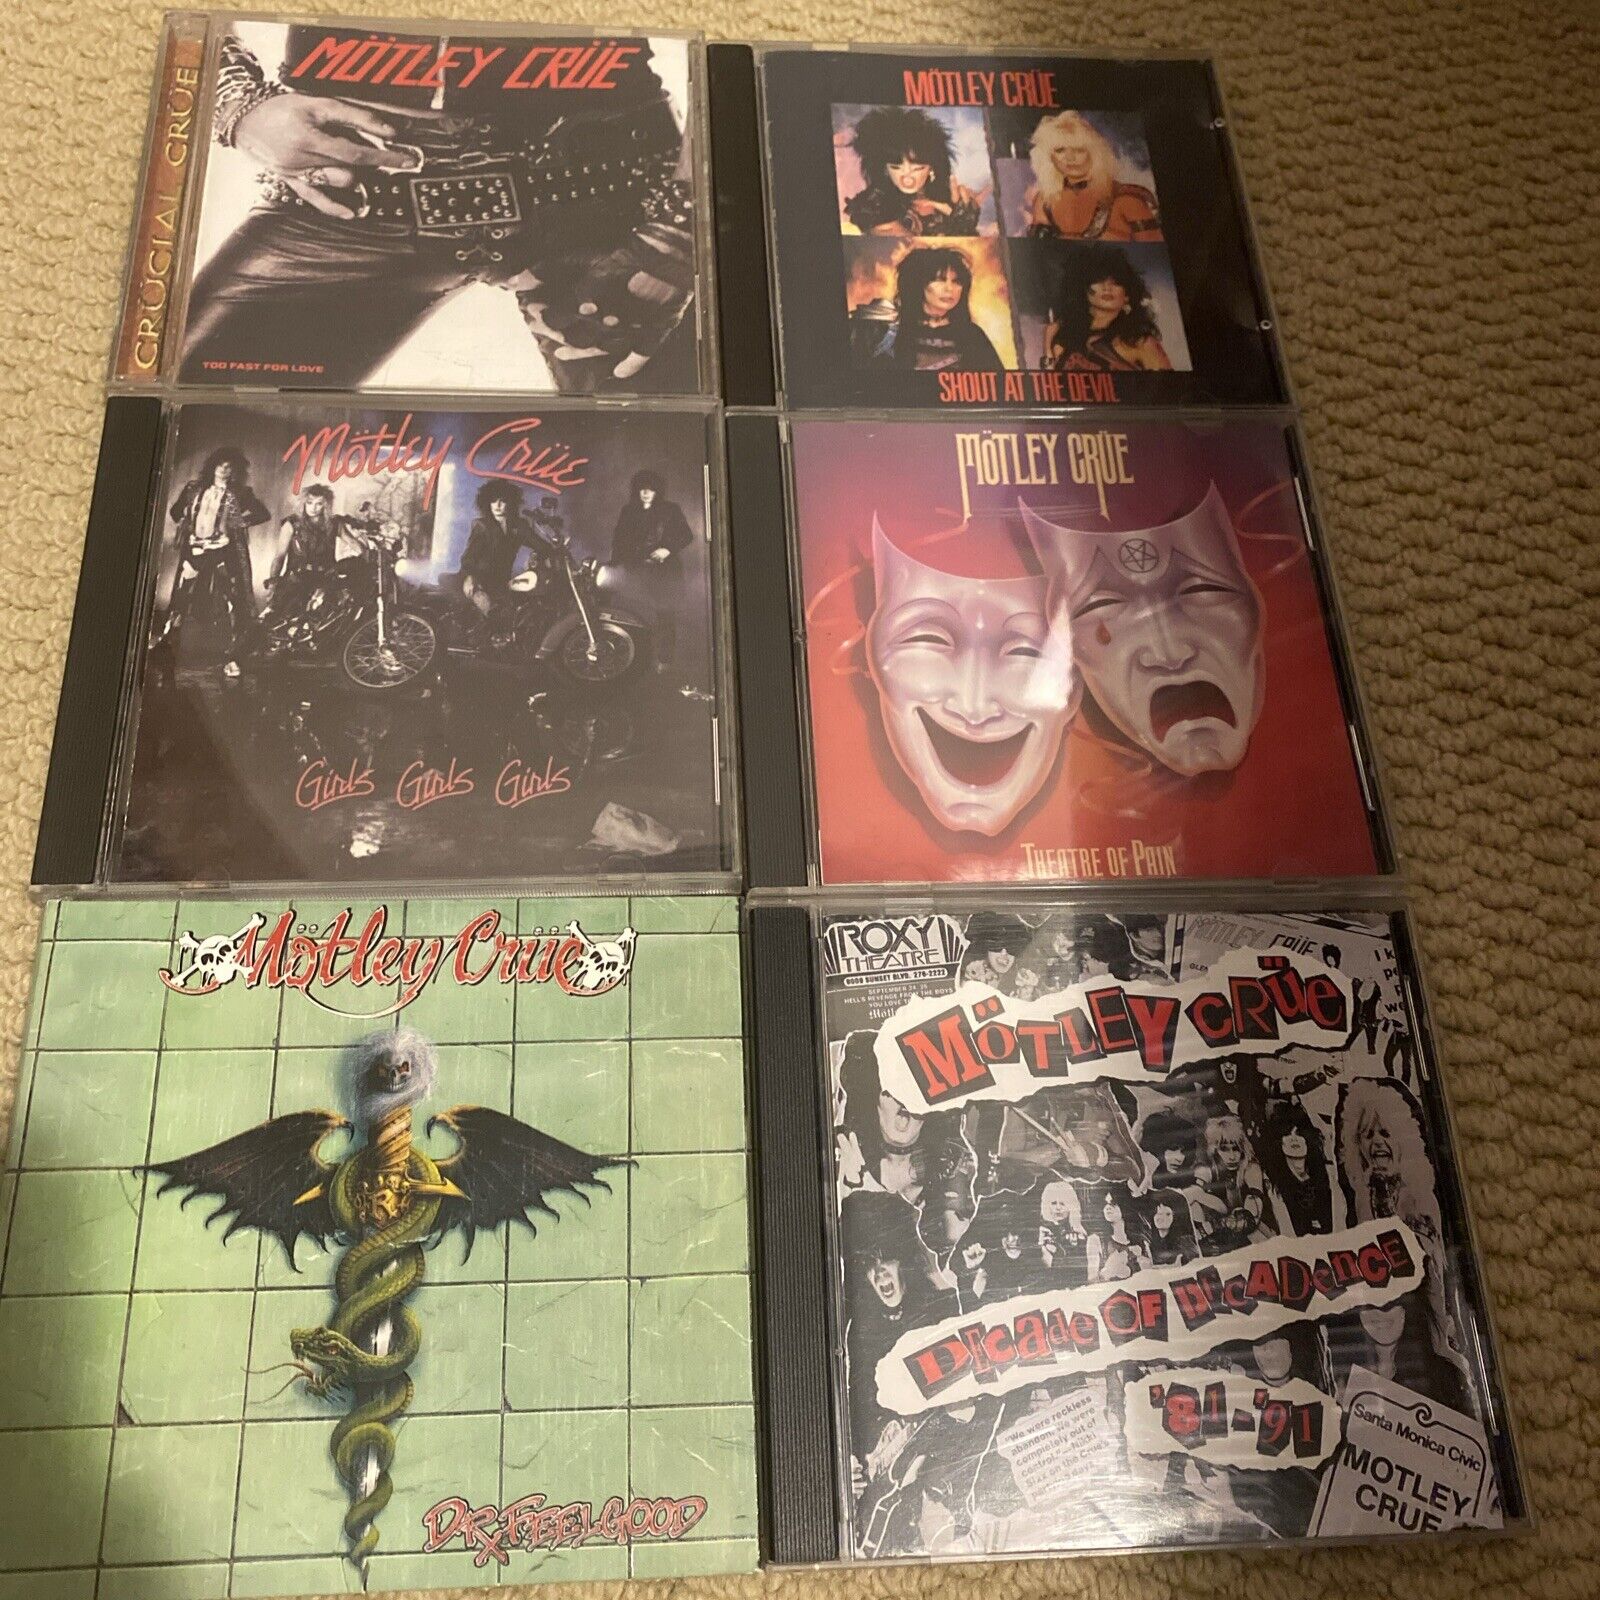 Motley Crue Cd Lot. 6 Cd Lot All In Excellent Condition. See Titles Below